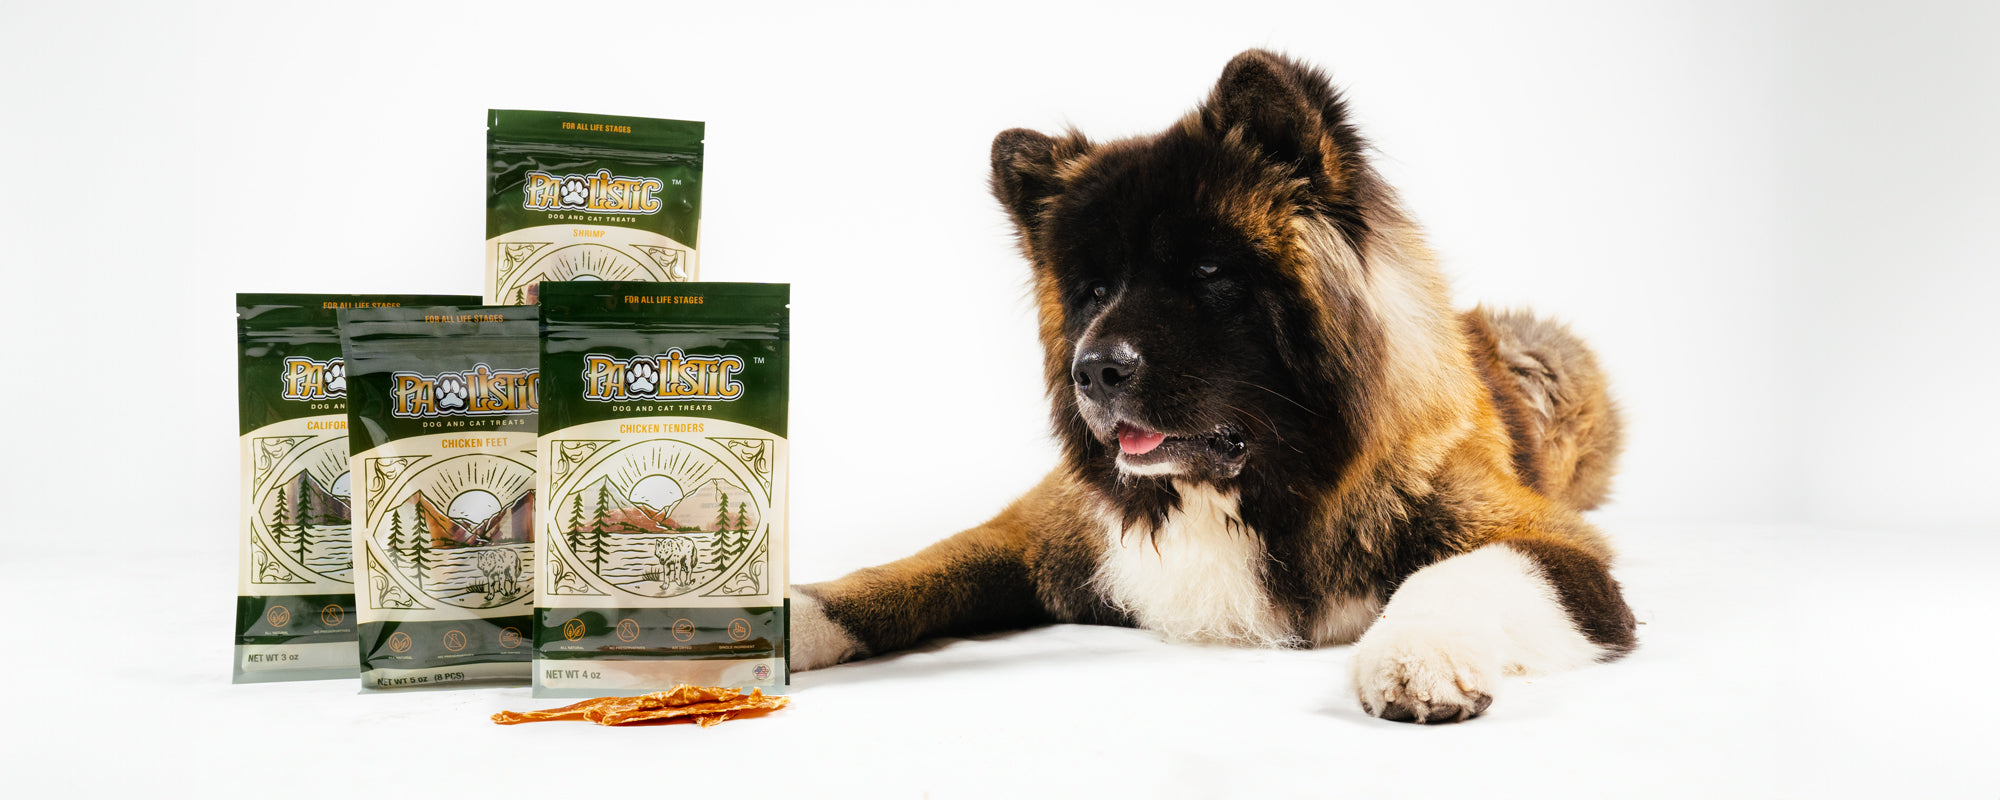 American Akita dog eagerly gazes at a pile of Pawlistic Treats, showcasing the delicious and nutritious pet treats. Enhance your furry friend's joy with Pawlistic's premium treats for a wholesome canine experience.